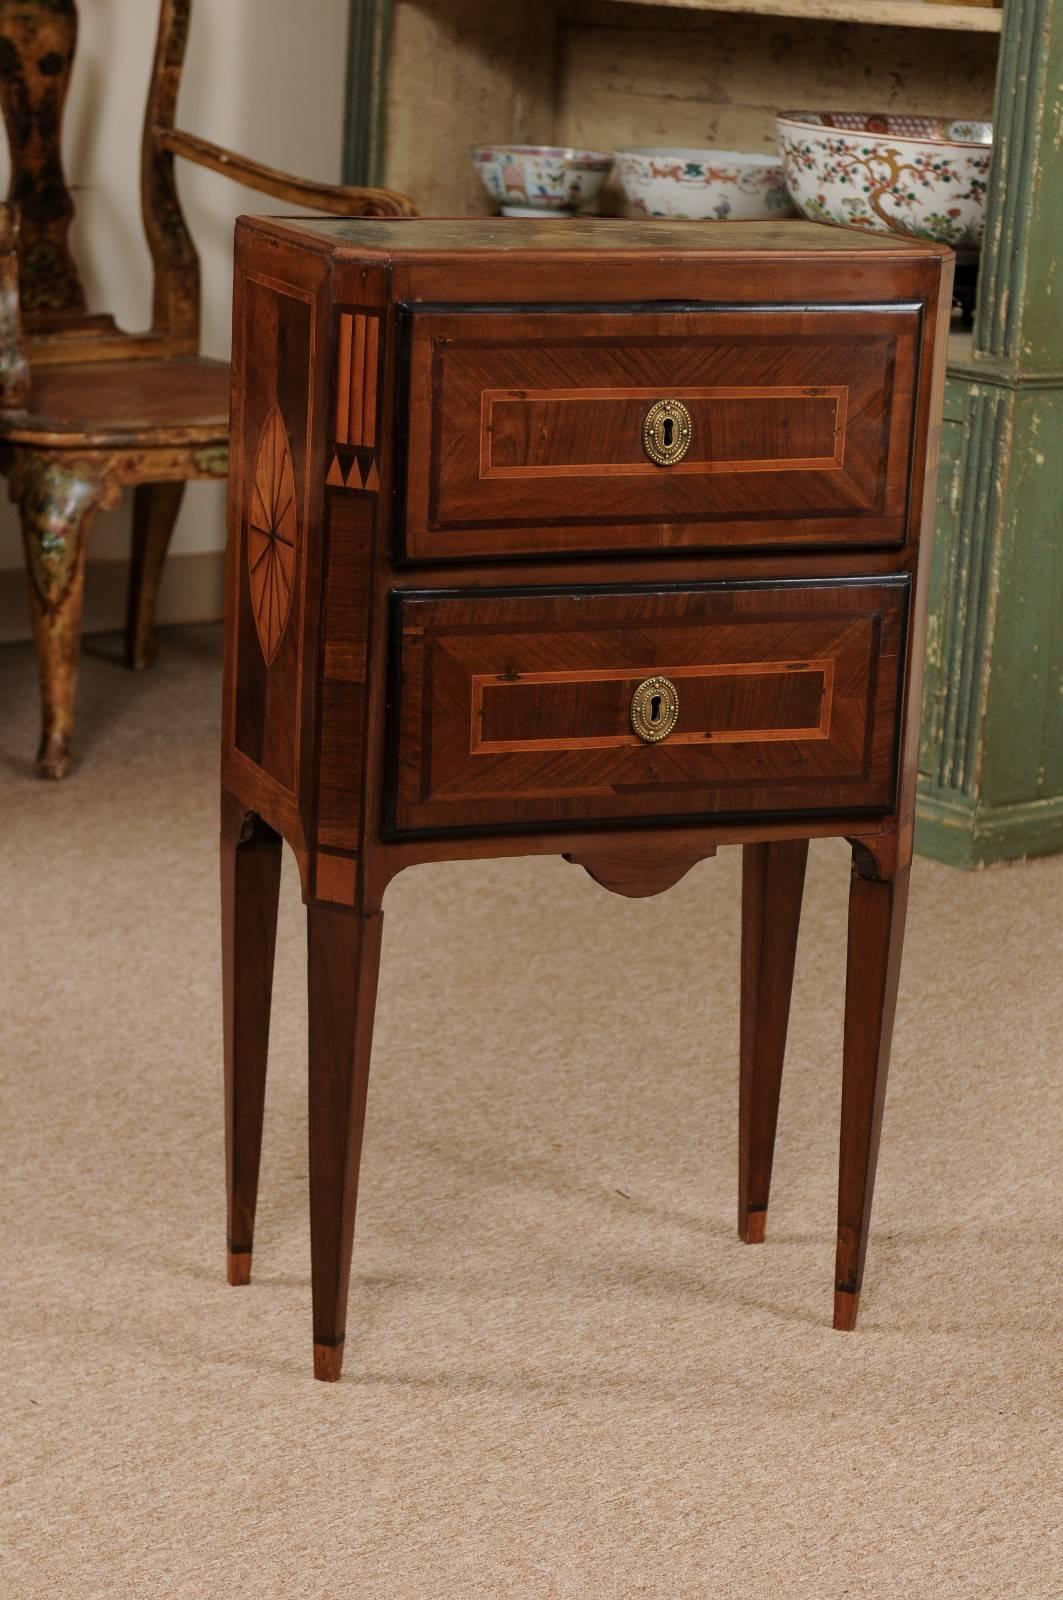 Neoclassical style Italian two drawer commodini with inset grey marble top, inlay, crossbanding, two drawers and tapered legs. The wood composed of walnut, satinwood, boxwood and ebonized wood.

William Word Fine Antiques: Atlanta's source for